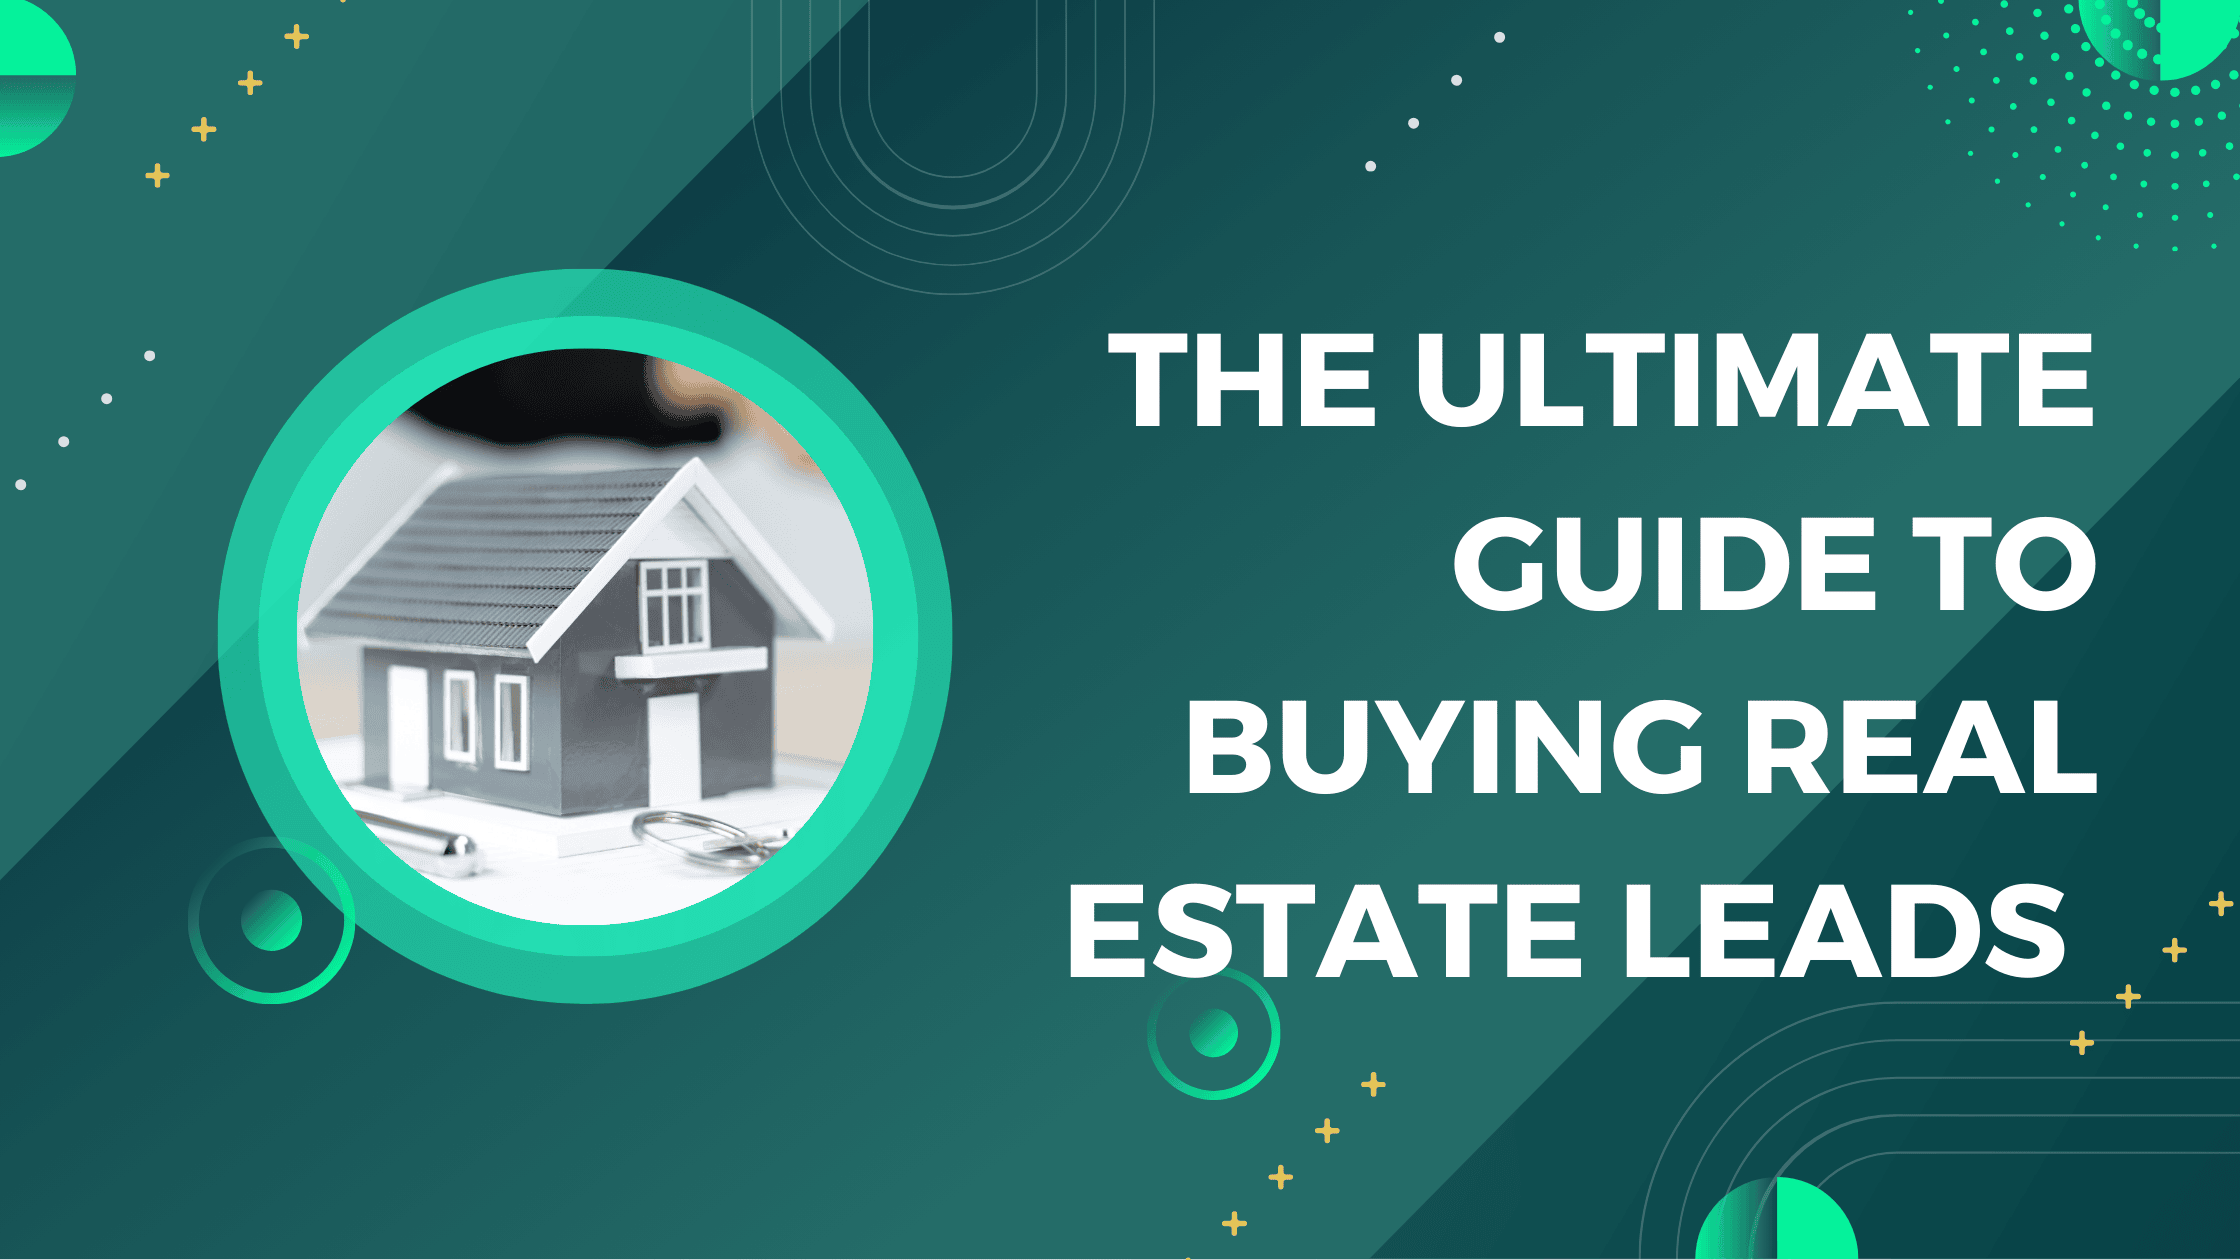 The Ultimate Guide to Buying Real Estate Leads